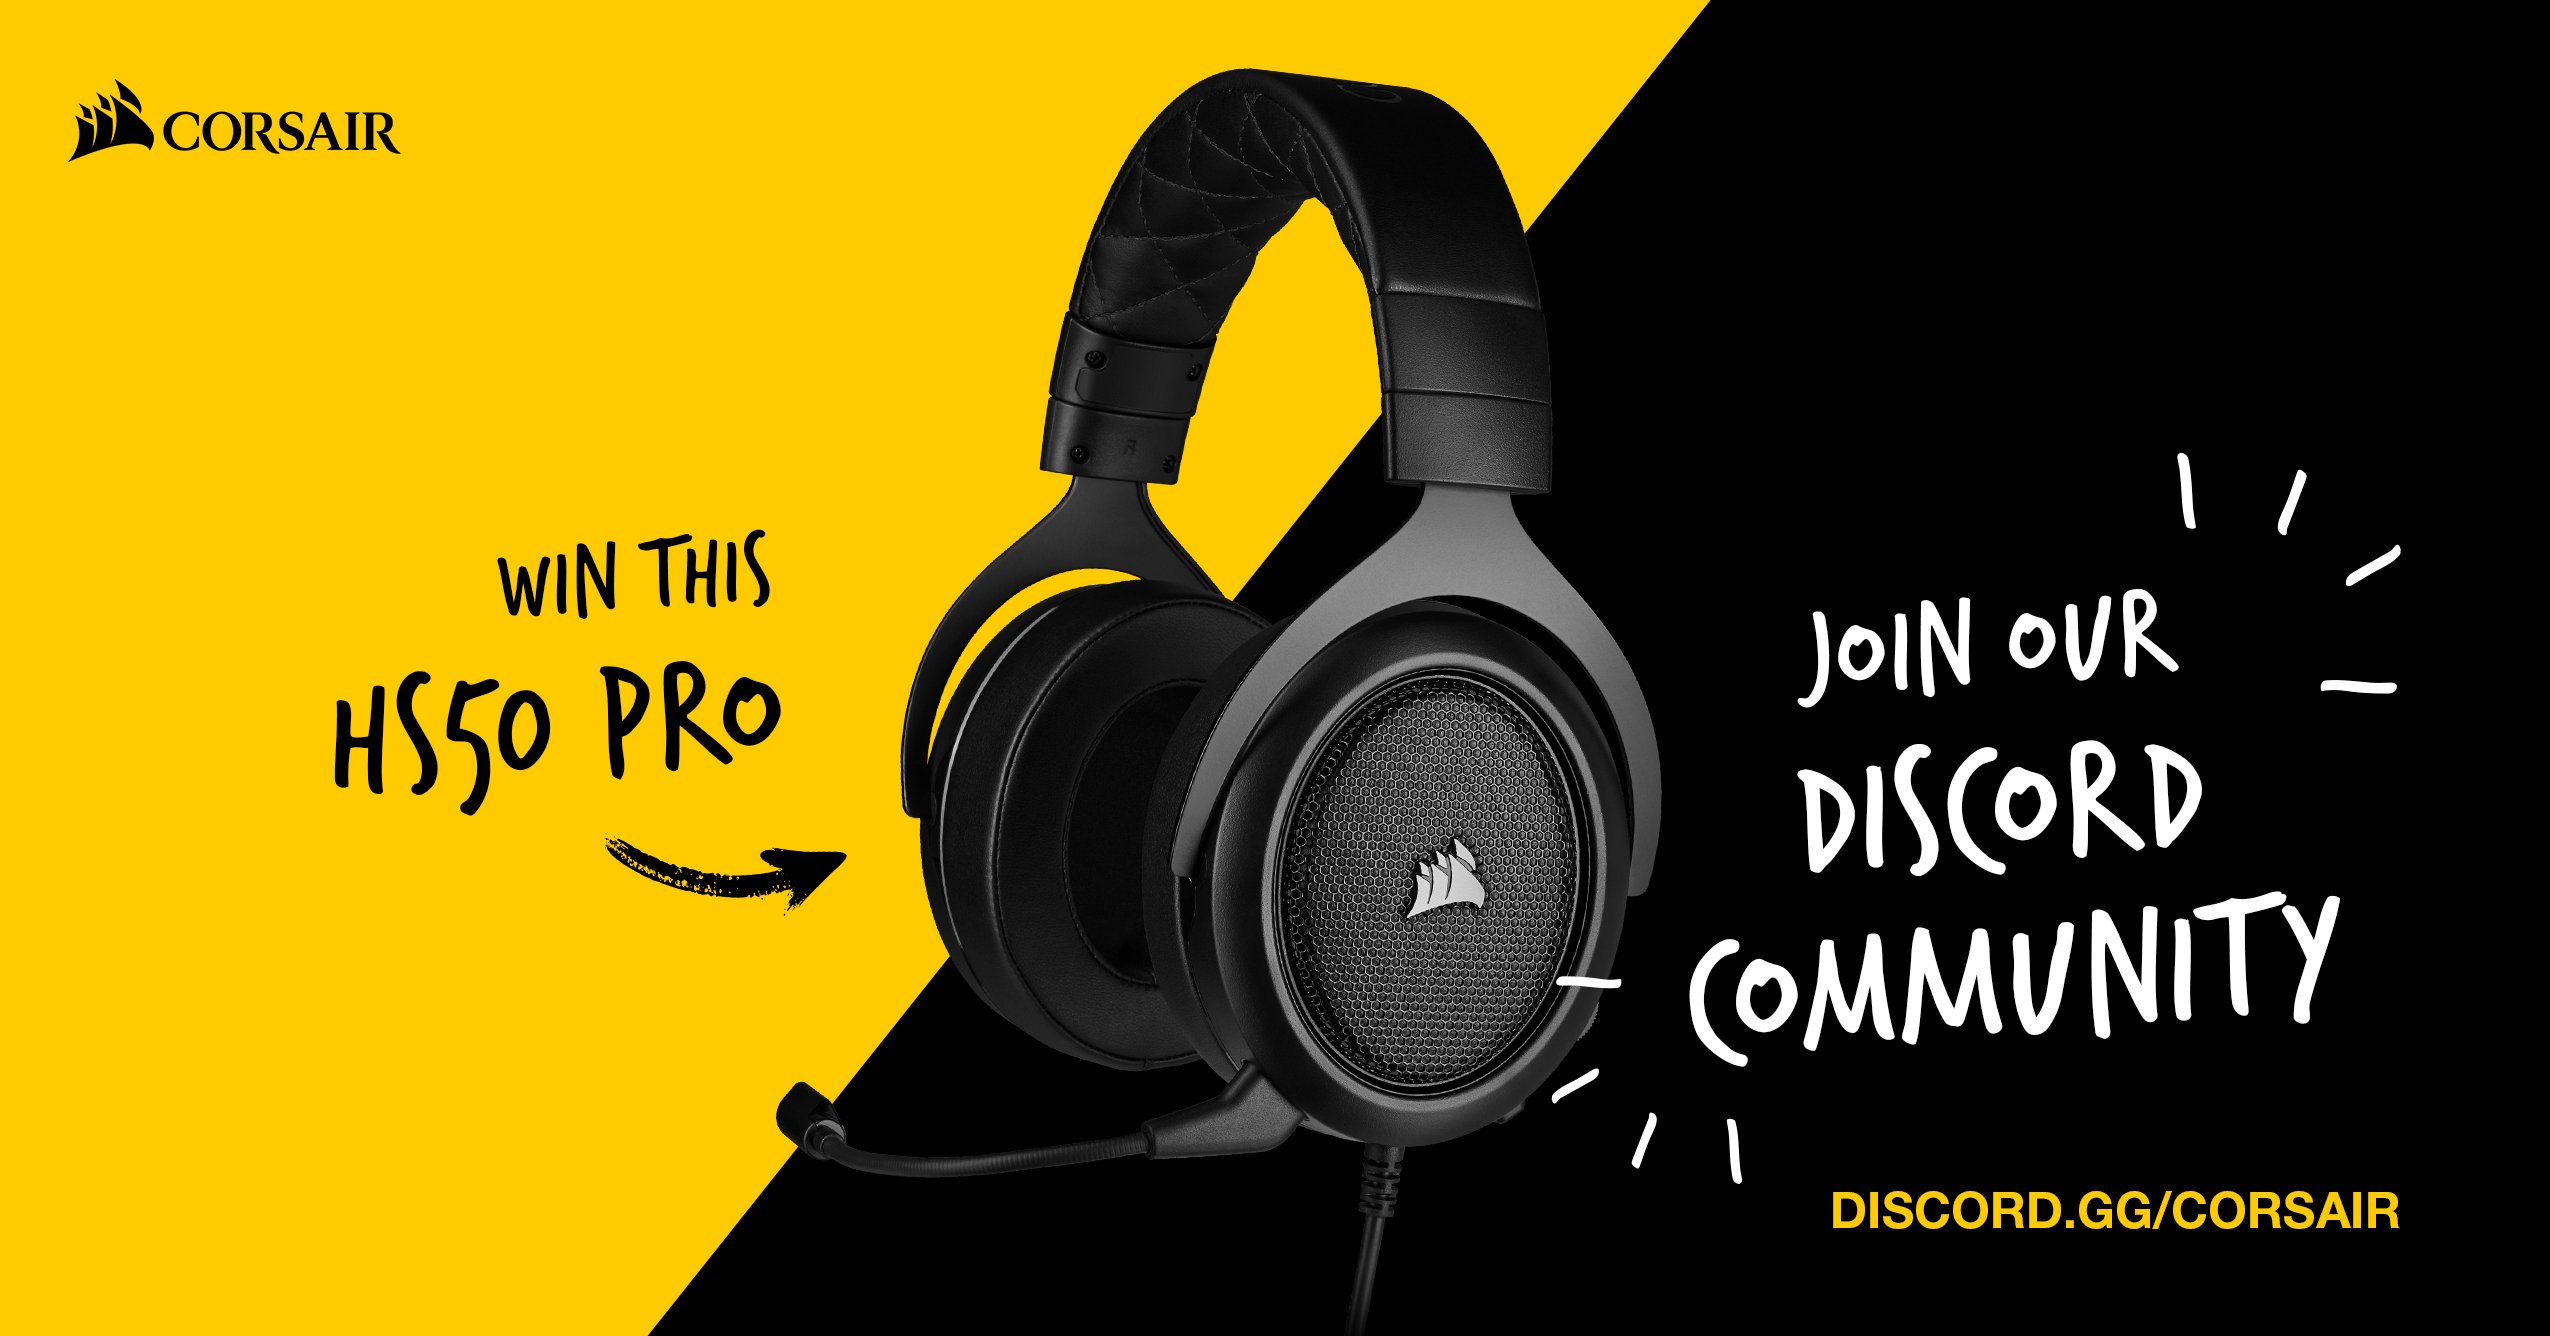 CORSAIR on Twitter: weekly giveaway is loading up on our Discord! https://t.co/T8J2uptU3h https://t.co/sx5TIdLHCU" / Twitter